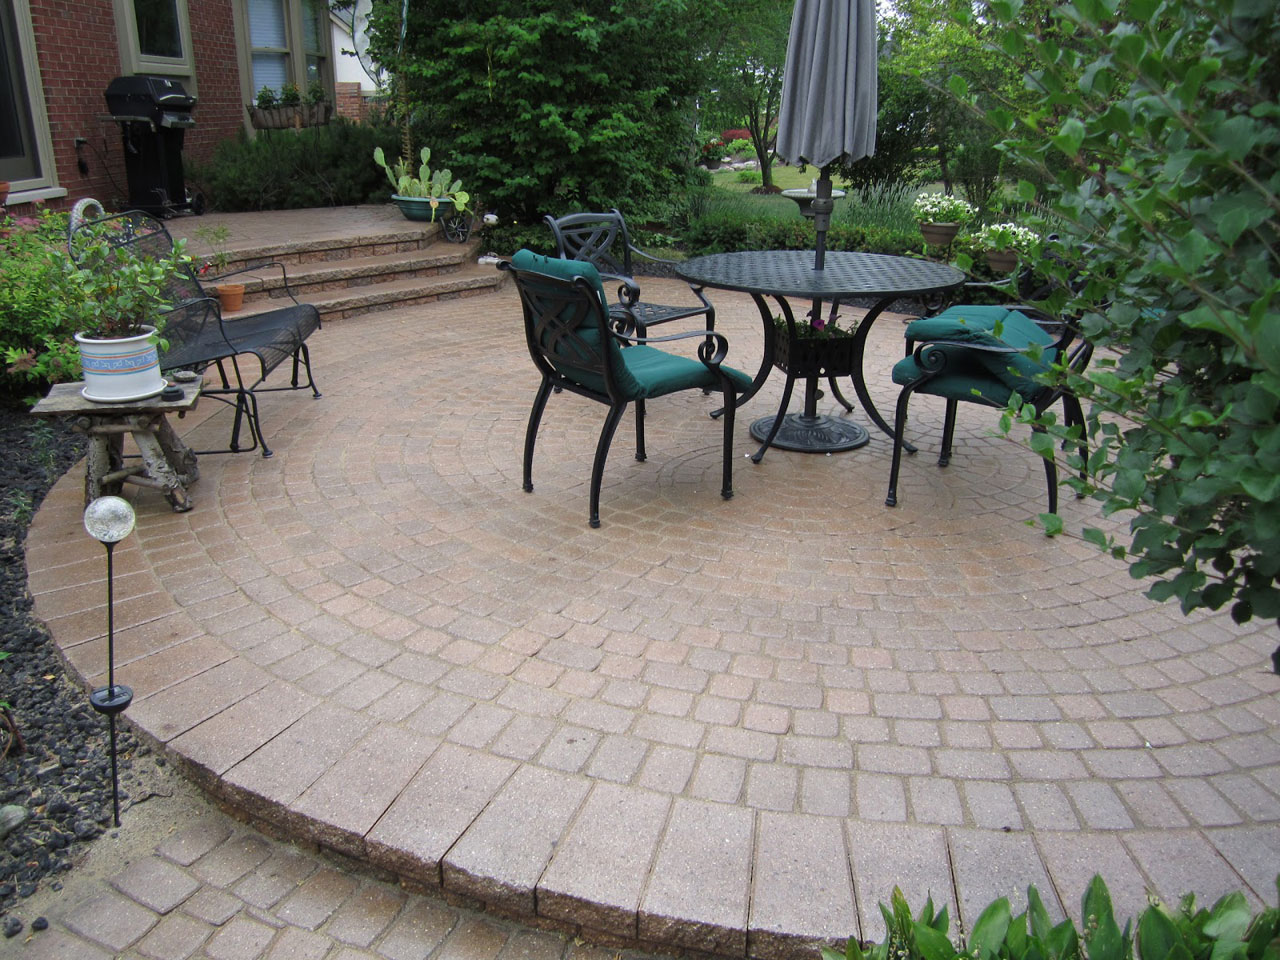 Patio Ideas Design Paver Patio Ideas With Traditional Design Completed With Outdoor Patio Furniture Using Umbrella Design Ideas Backyard Paver Patio Ideas For Enchanting Backyard